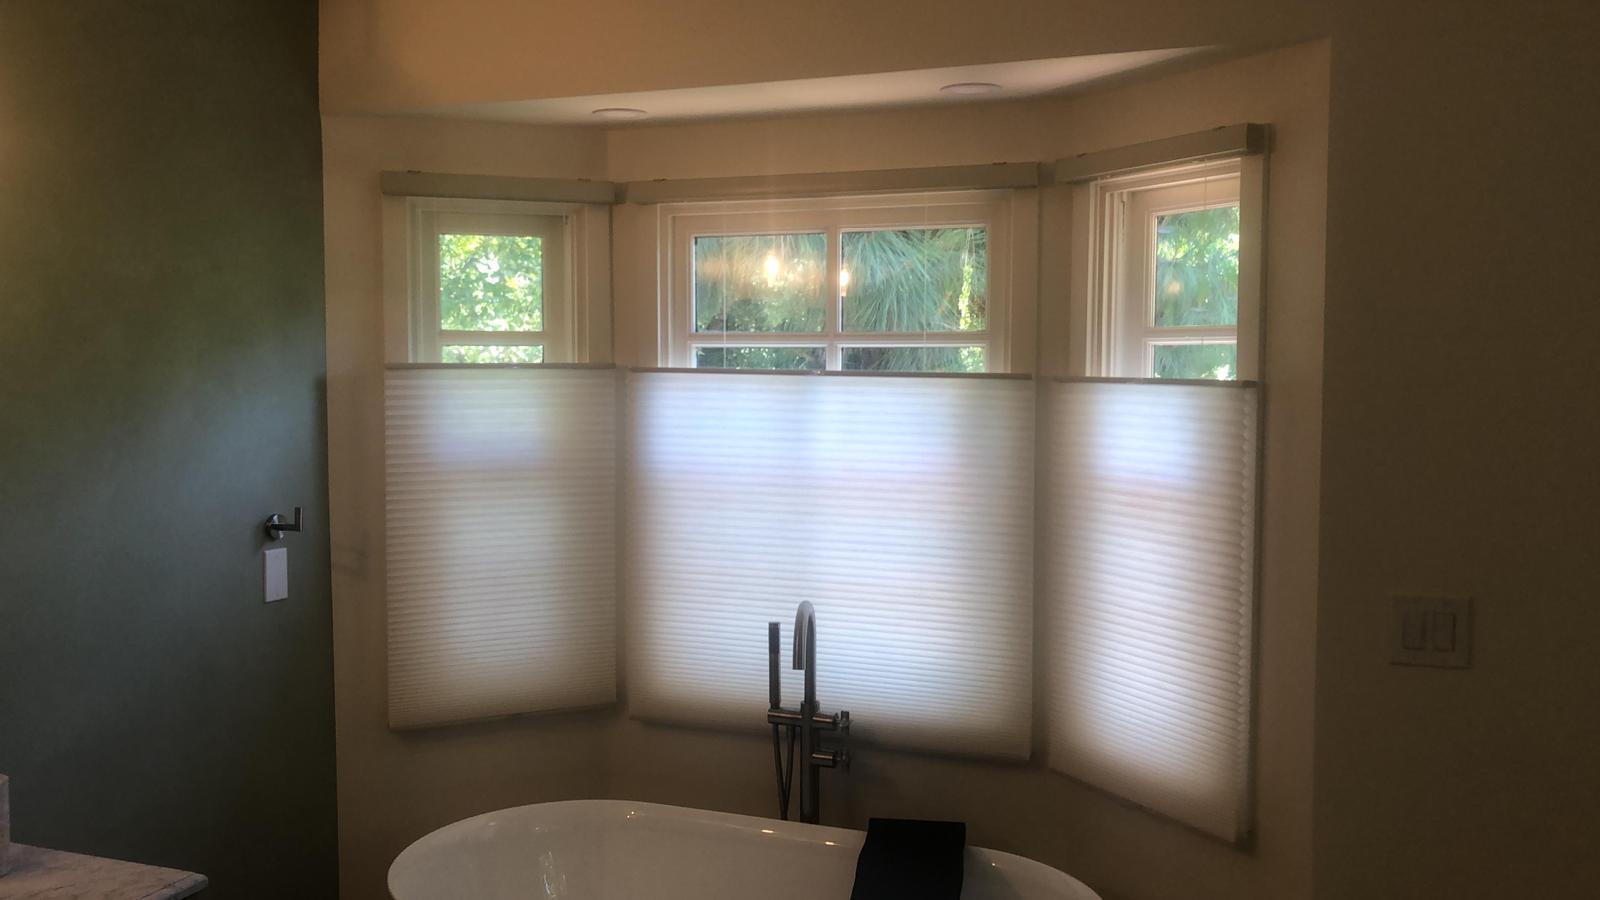 Cellular shades are a safe, cordless choice for families with children. Also available with motorization for those hard to reach windows.